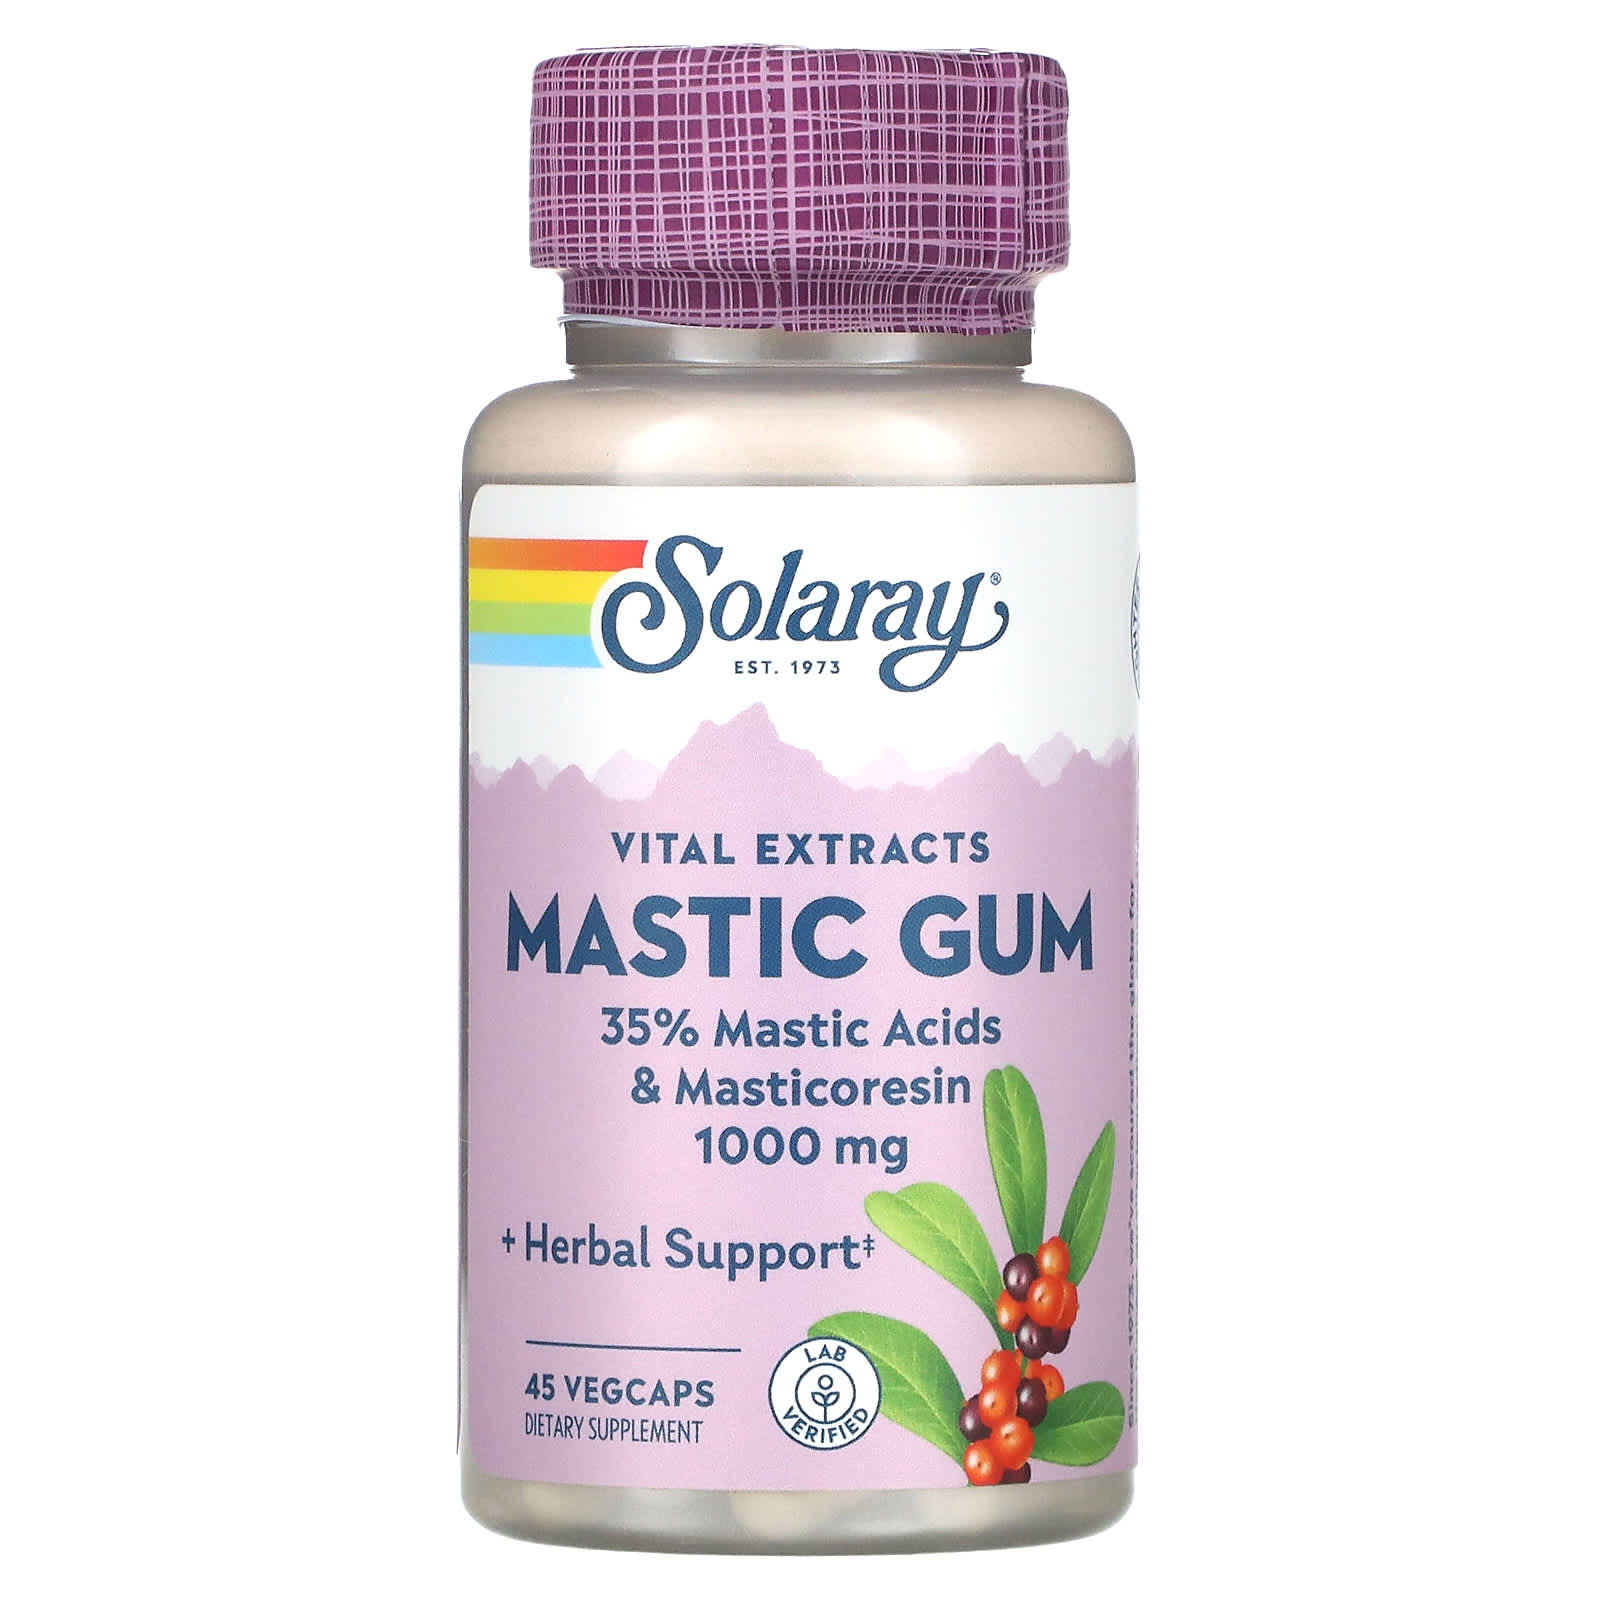 Jarrow Formulas Mastic Gum 60 Tablets - Low Price, Check Reviews and  Suggested Use